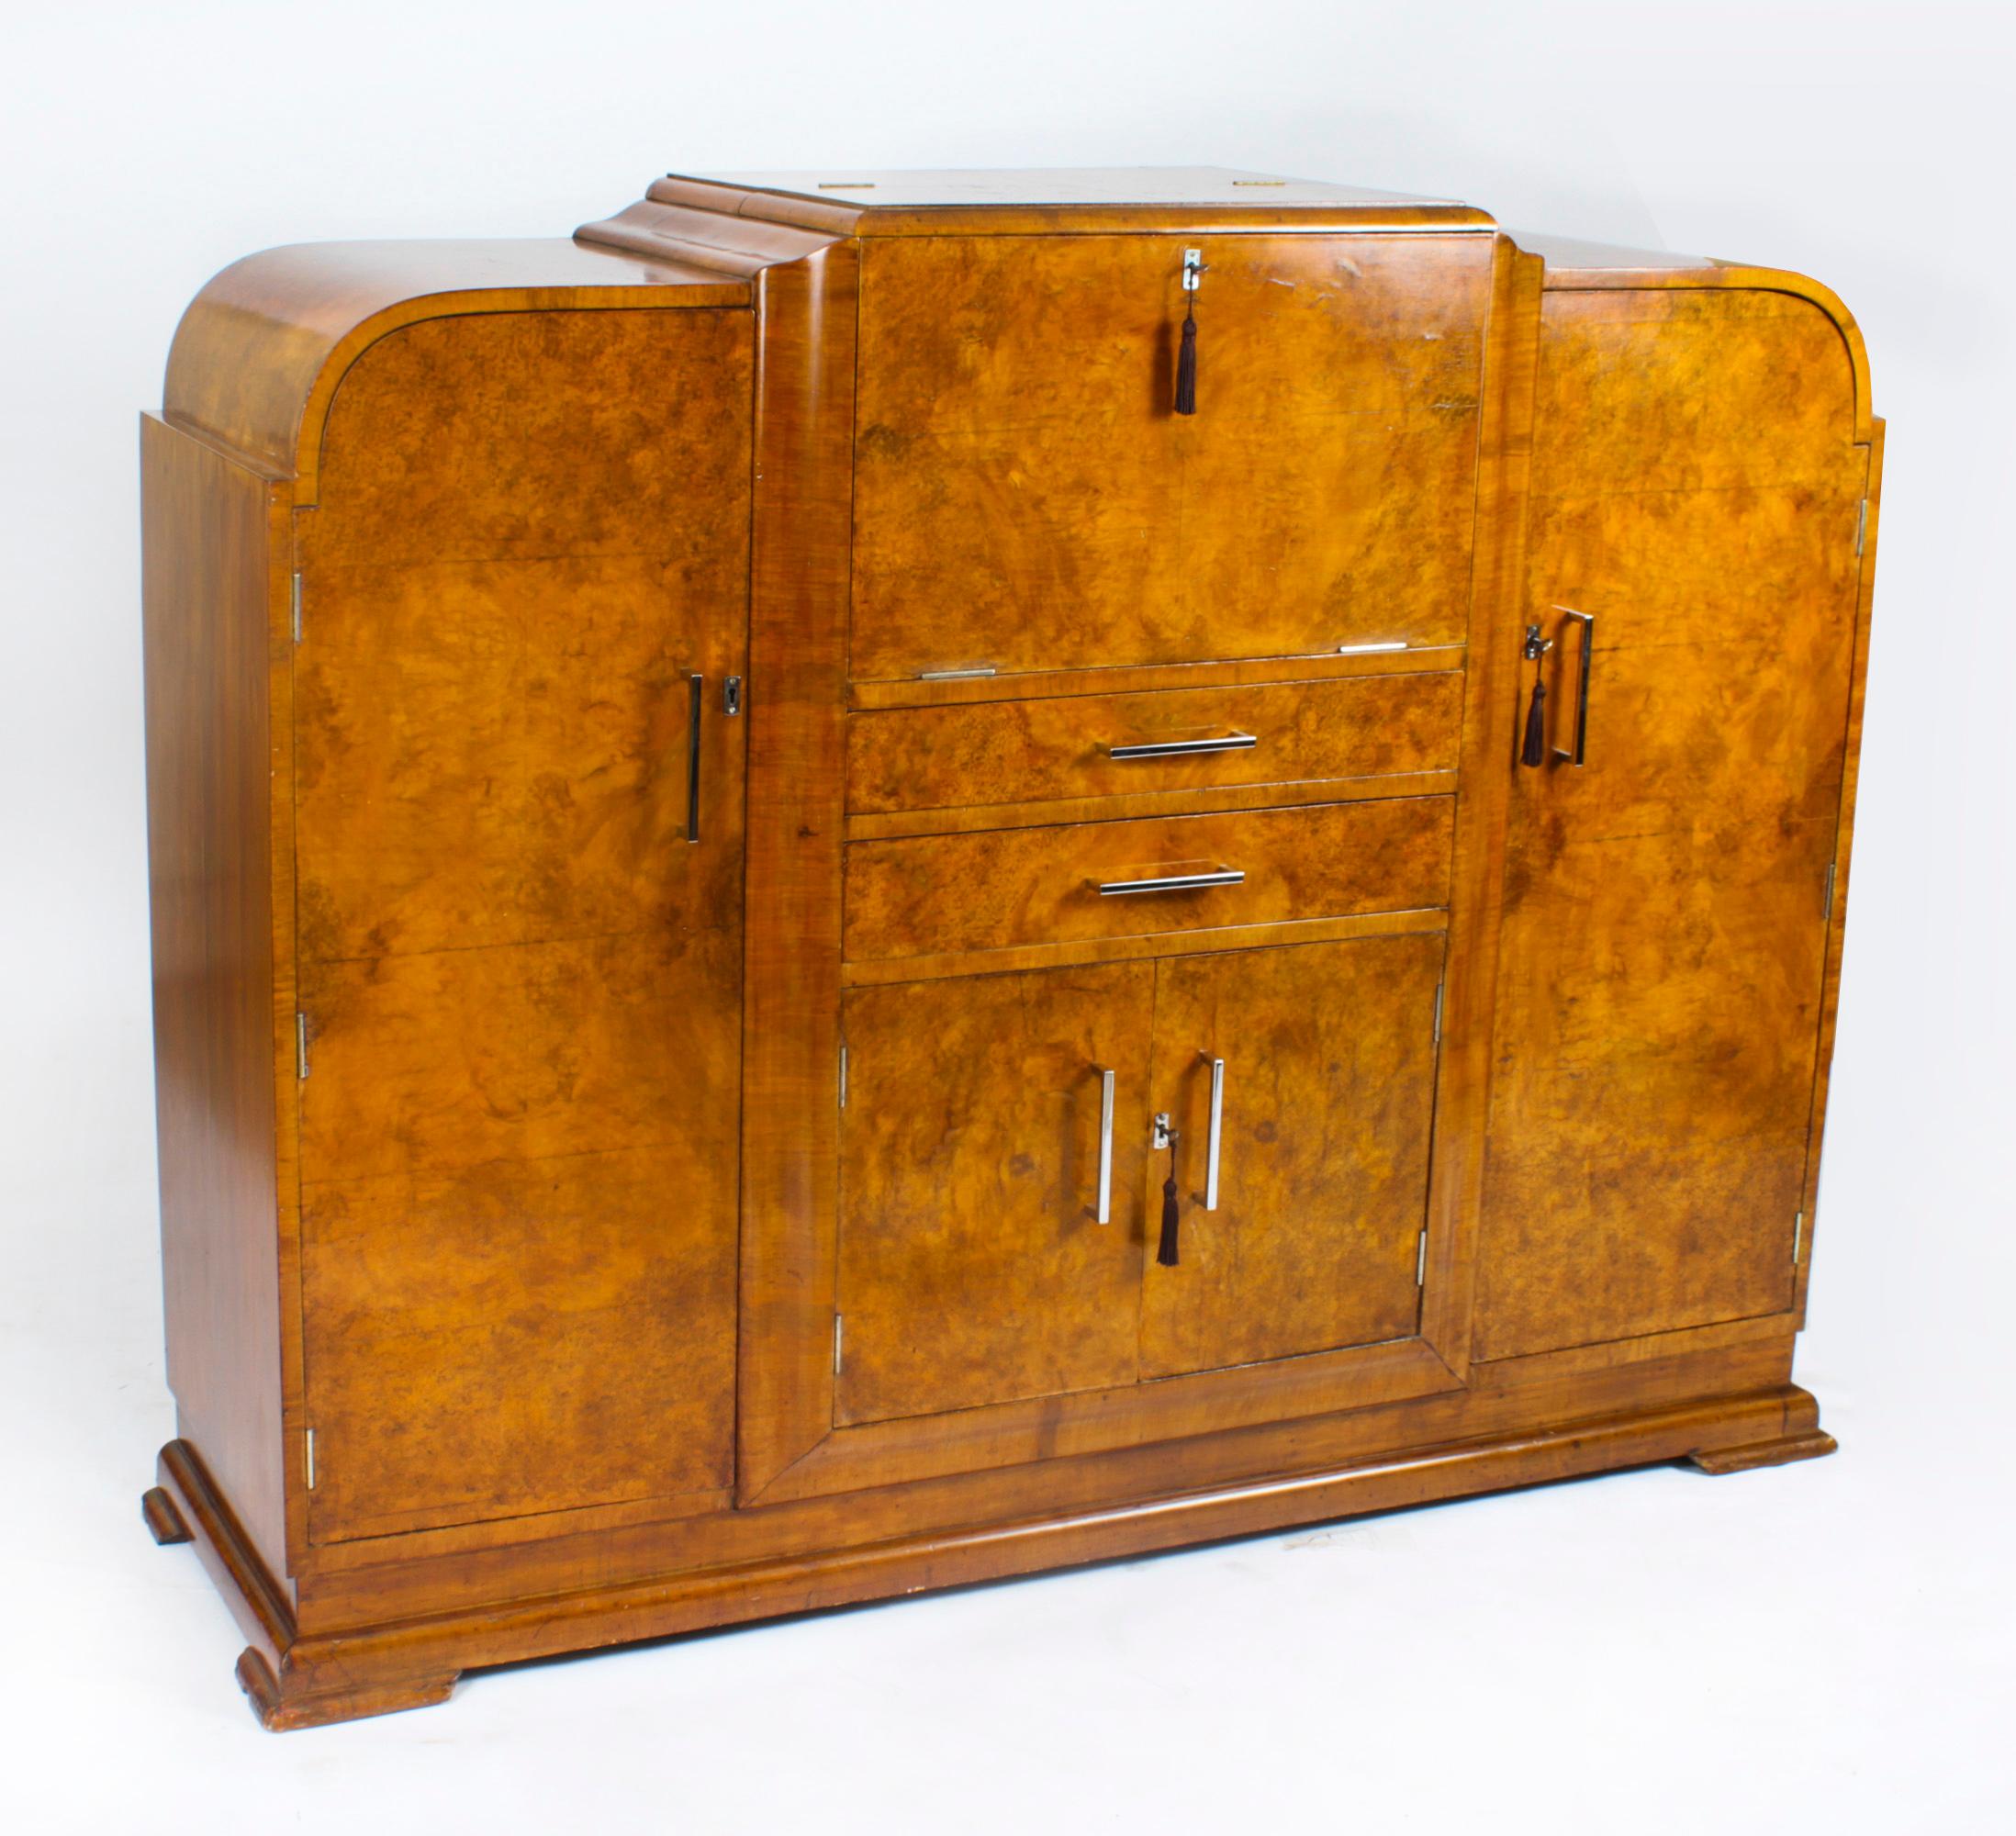 This is a superb antique Art Deco burr walnut cocktail cabinet sideboard complete with glassware, circa 1920 in date.
 
The upper part comprises a fall front that opens to reveal a striking fitted mirrored interior and comes complete with a suite